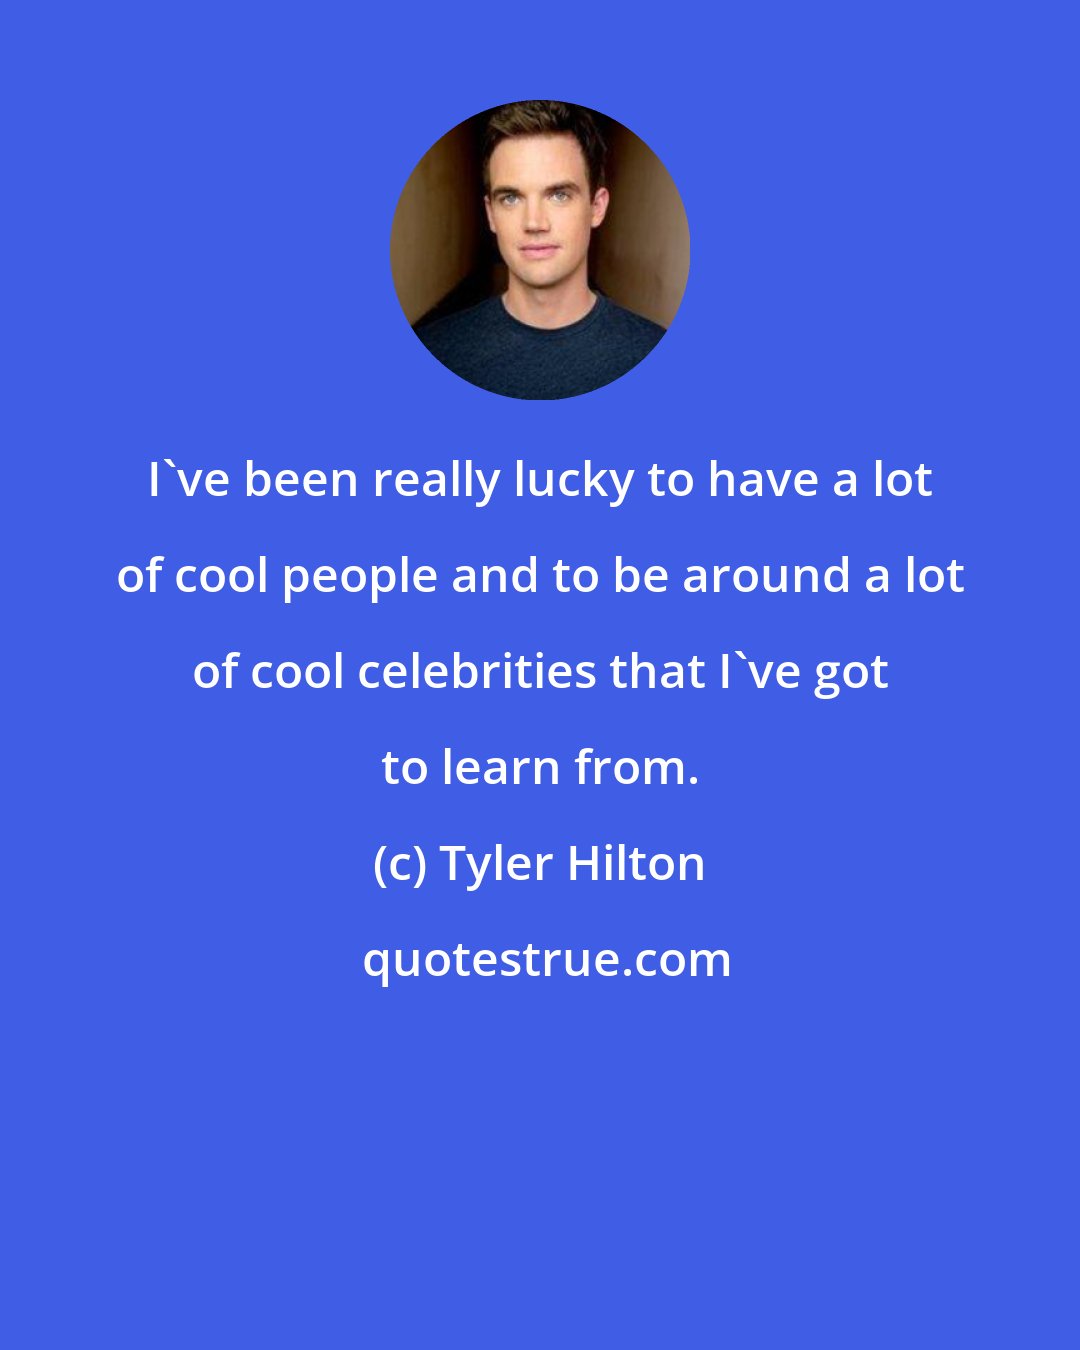 Tyler Hilton: I've been really lucky to have a lot of cool people and to be around a lot of cool celebrities that I've got to learn from.